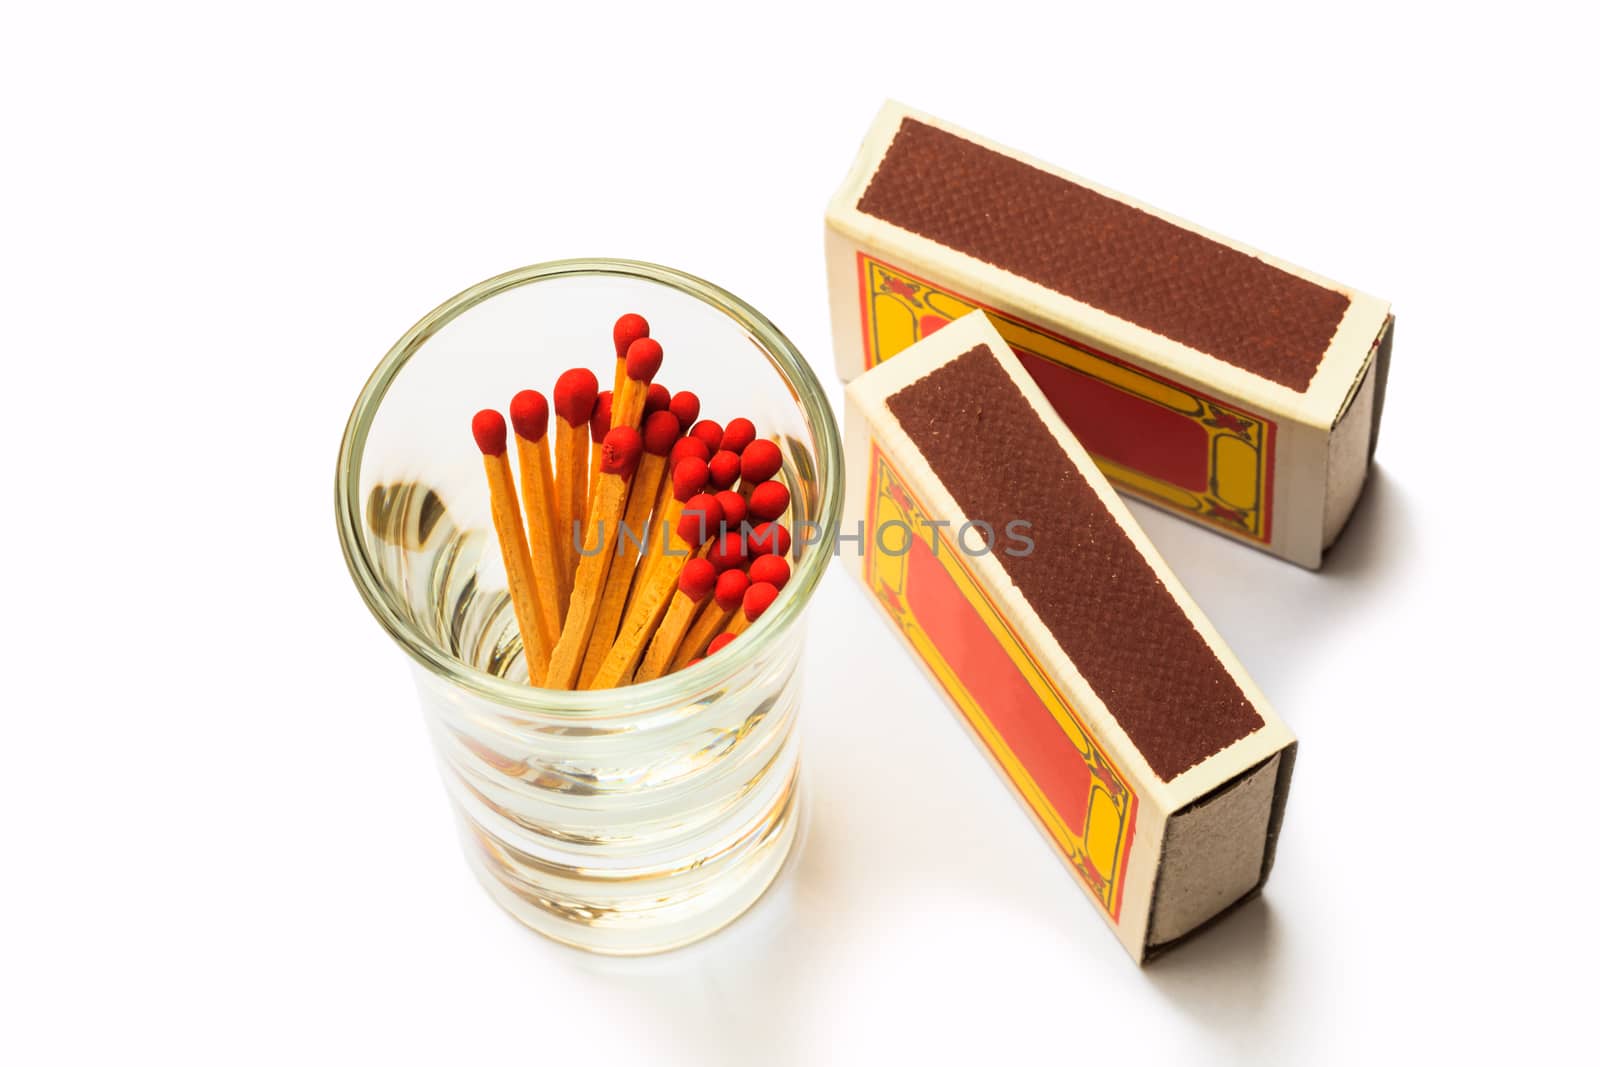 Matches and Matches Box on white background